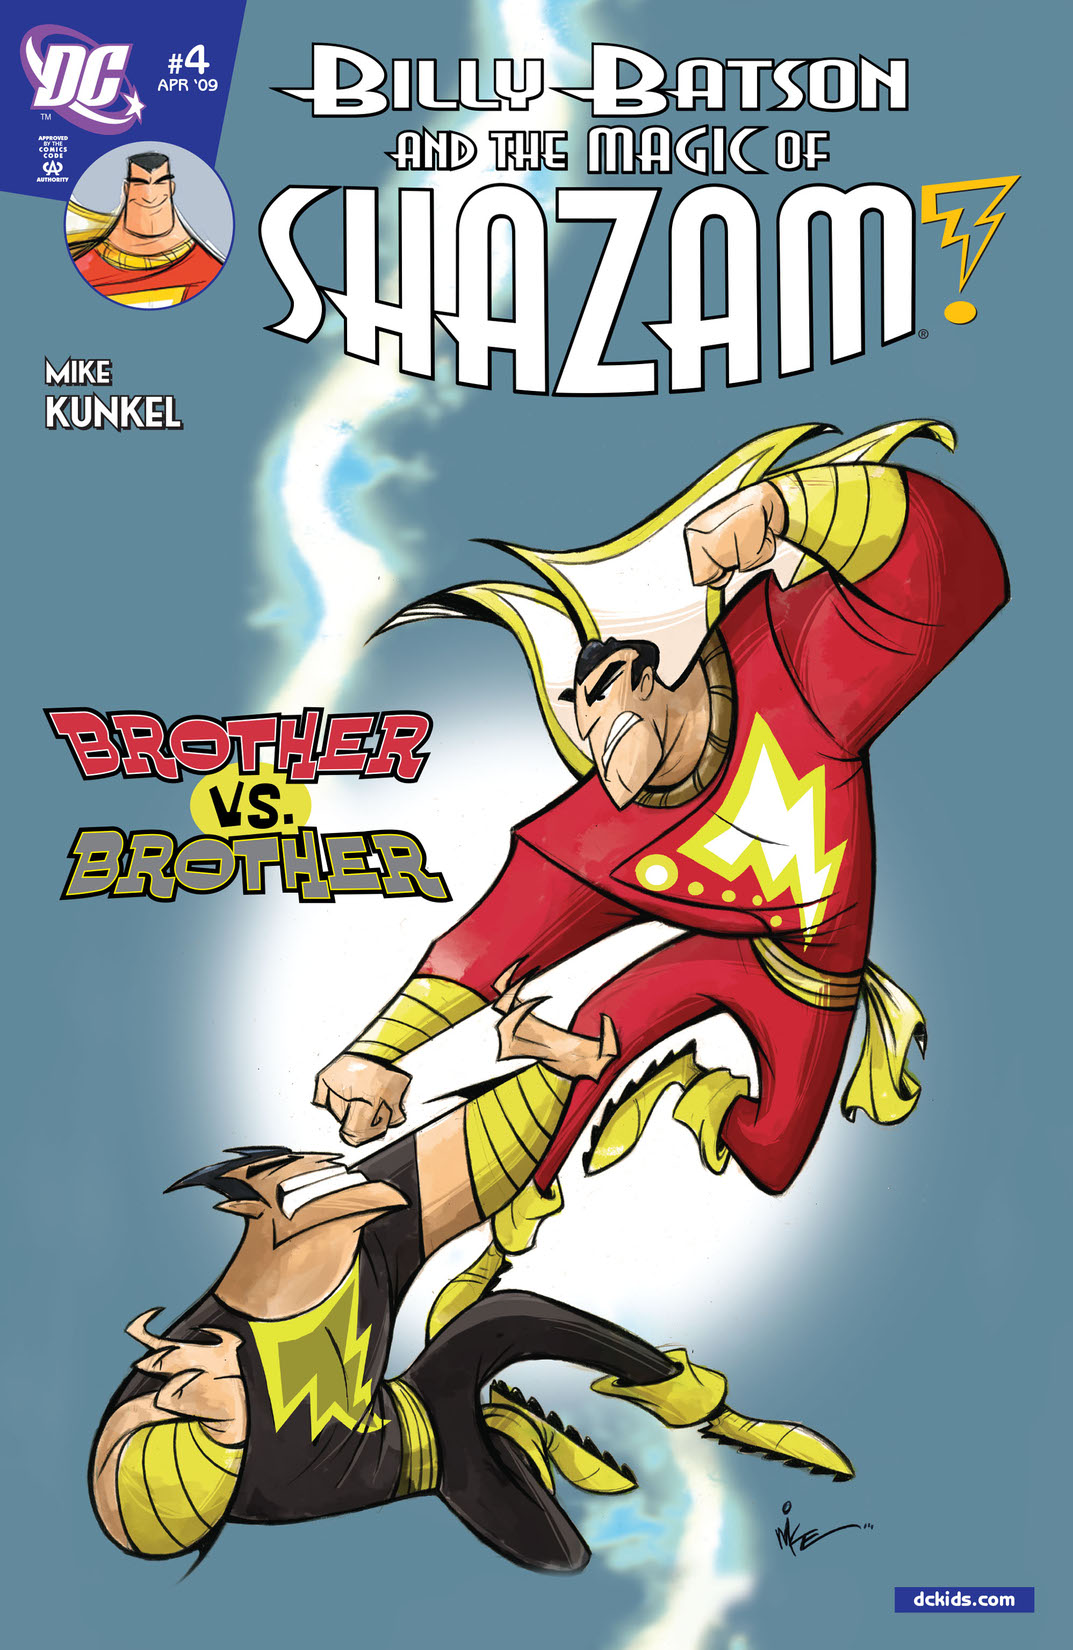 Billy Batson & the Magic of Shazam! #4 preview images